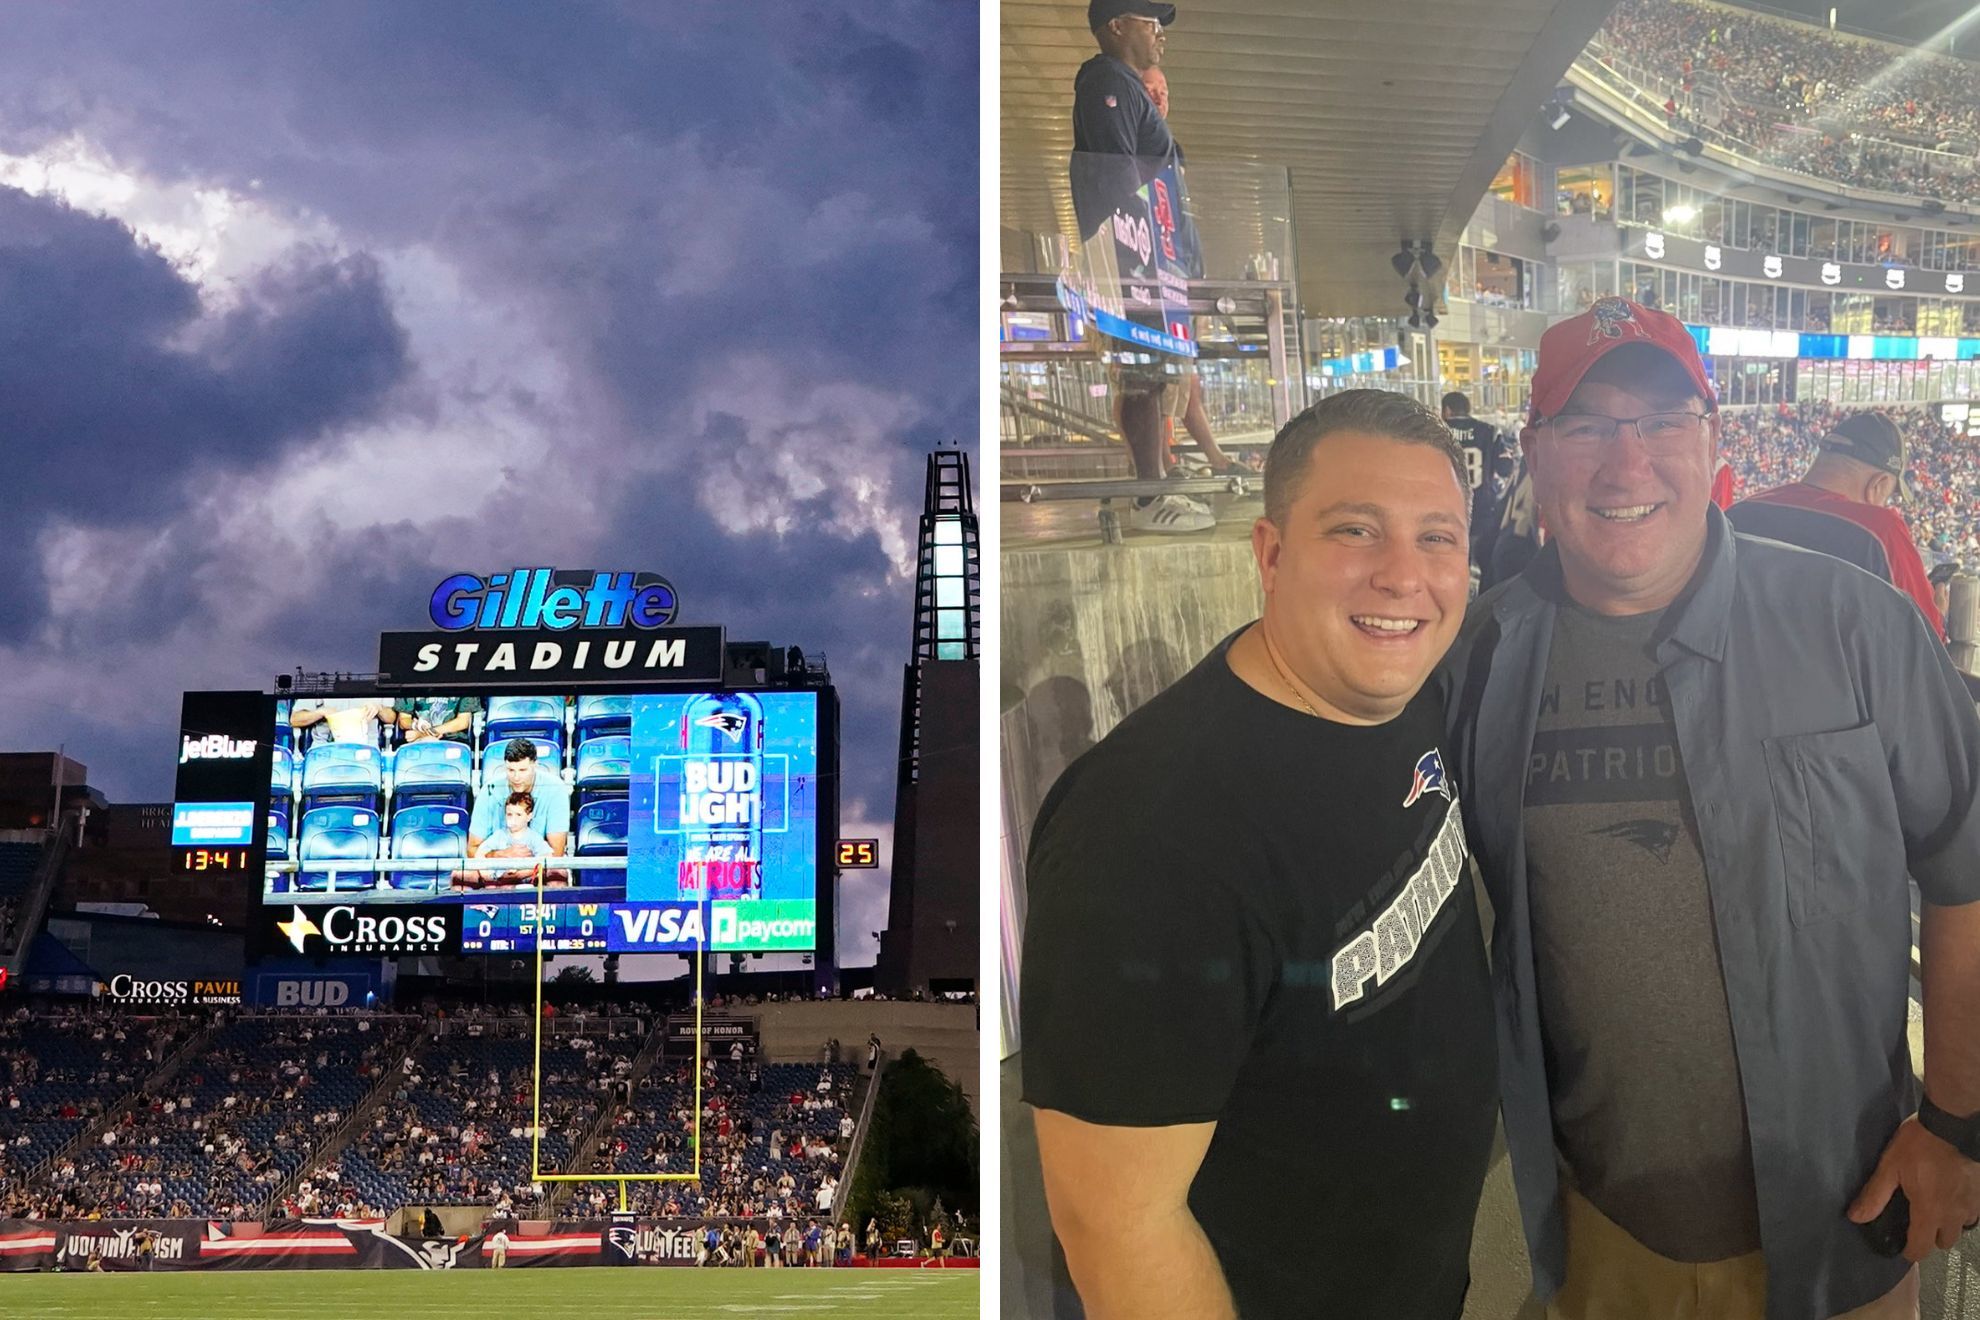 Two Patriots fans suffer medical incident at Gillette Stadium, only one lives thanks to off-duty firemen